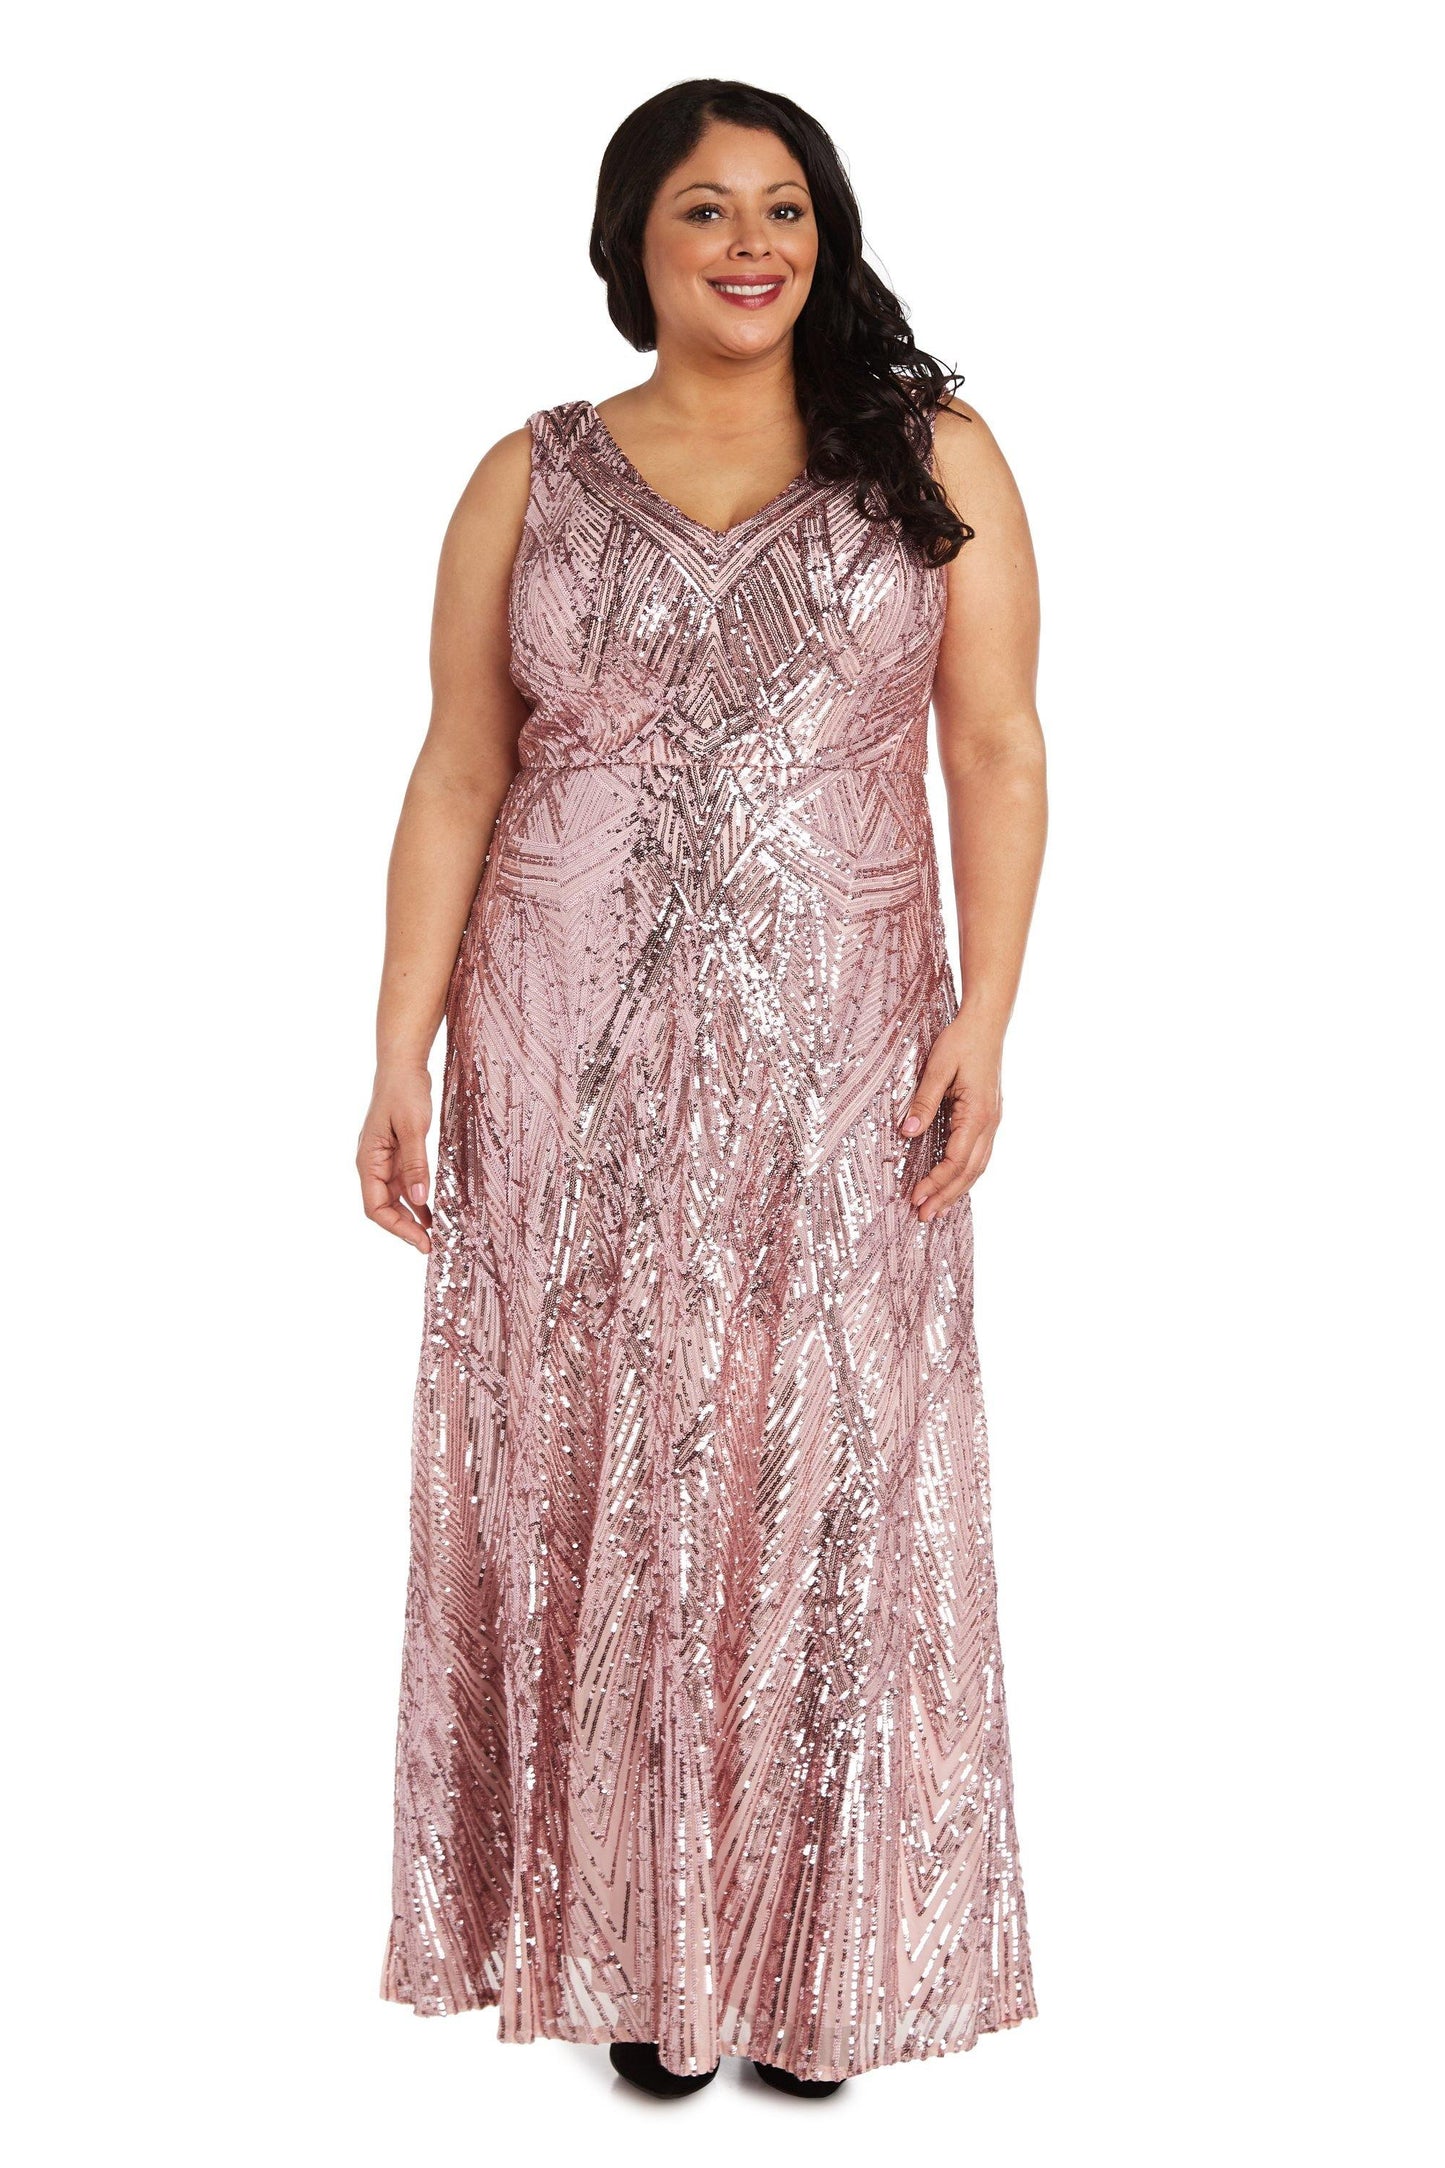 Nightway Long Plus Size Sleeveless Dress 22013W - The Dress Outlet